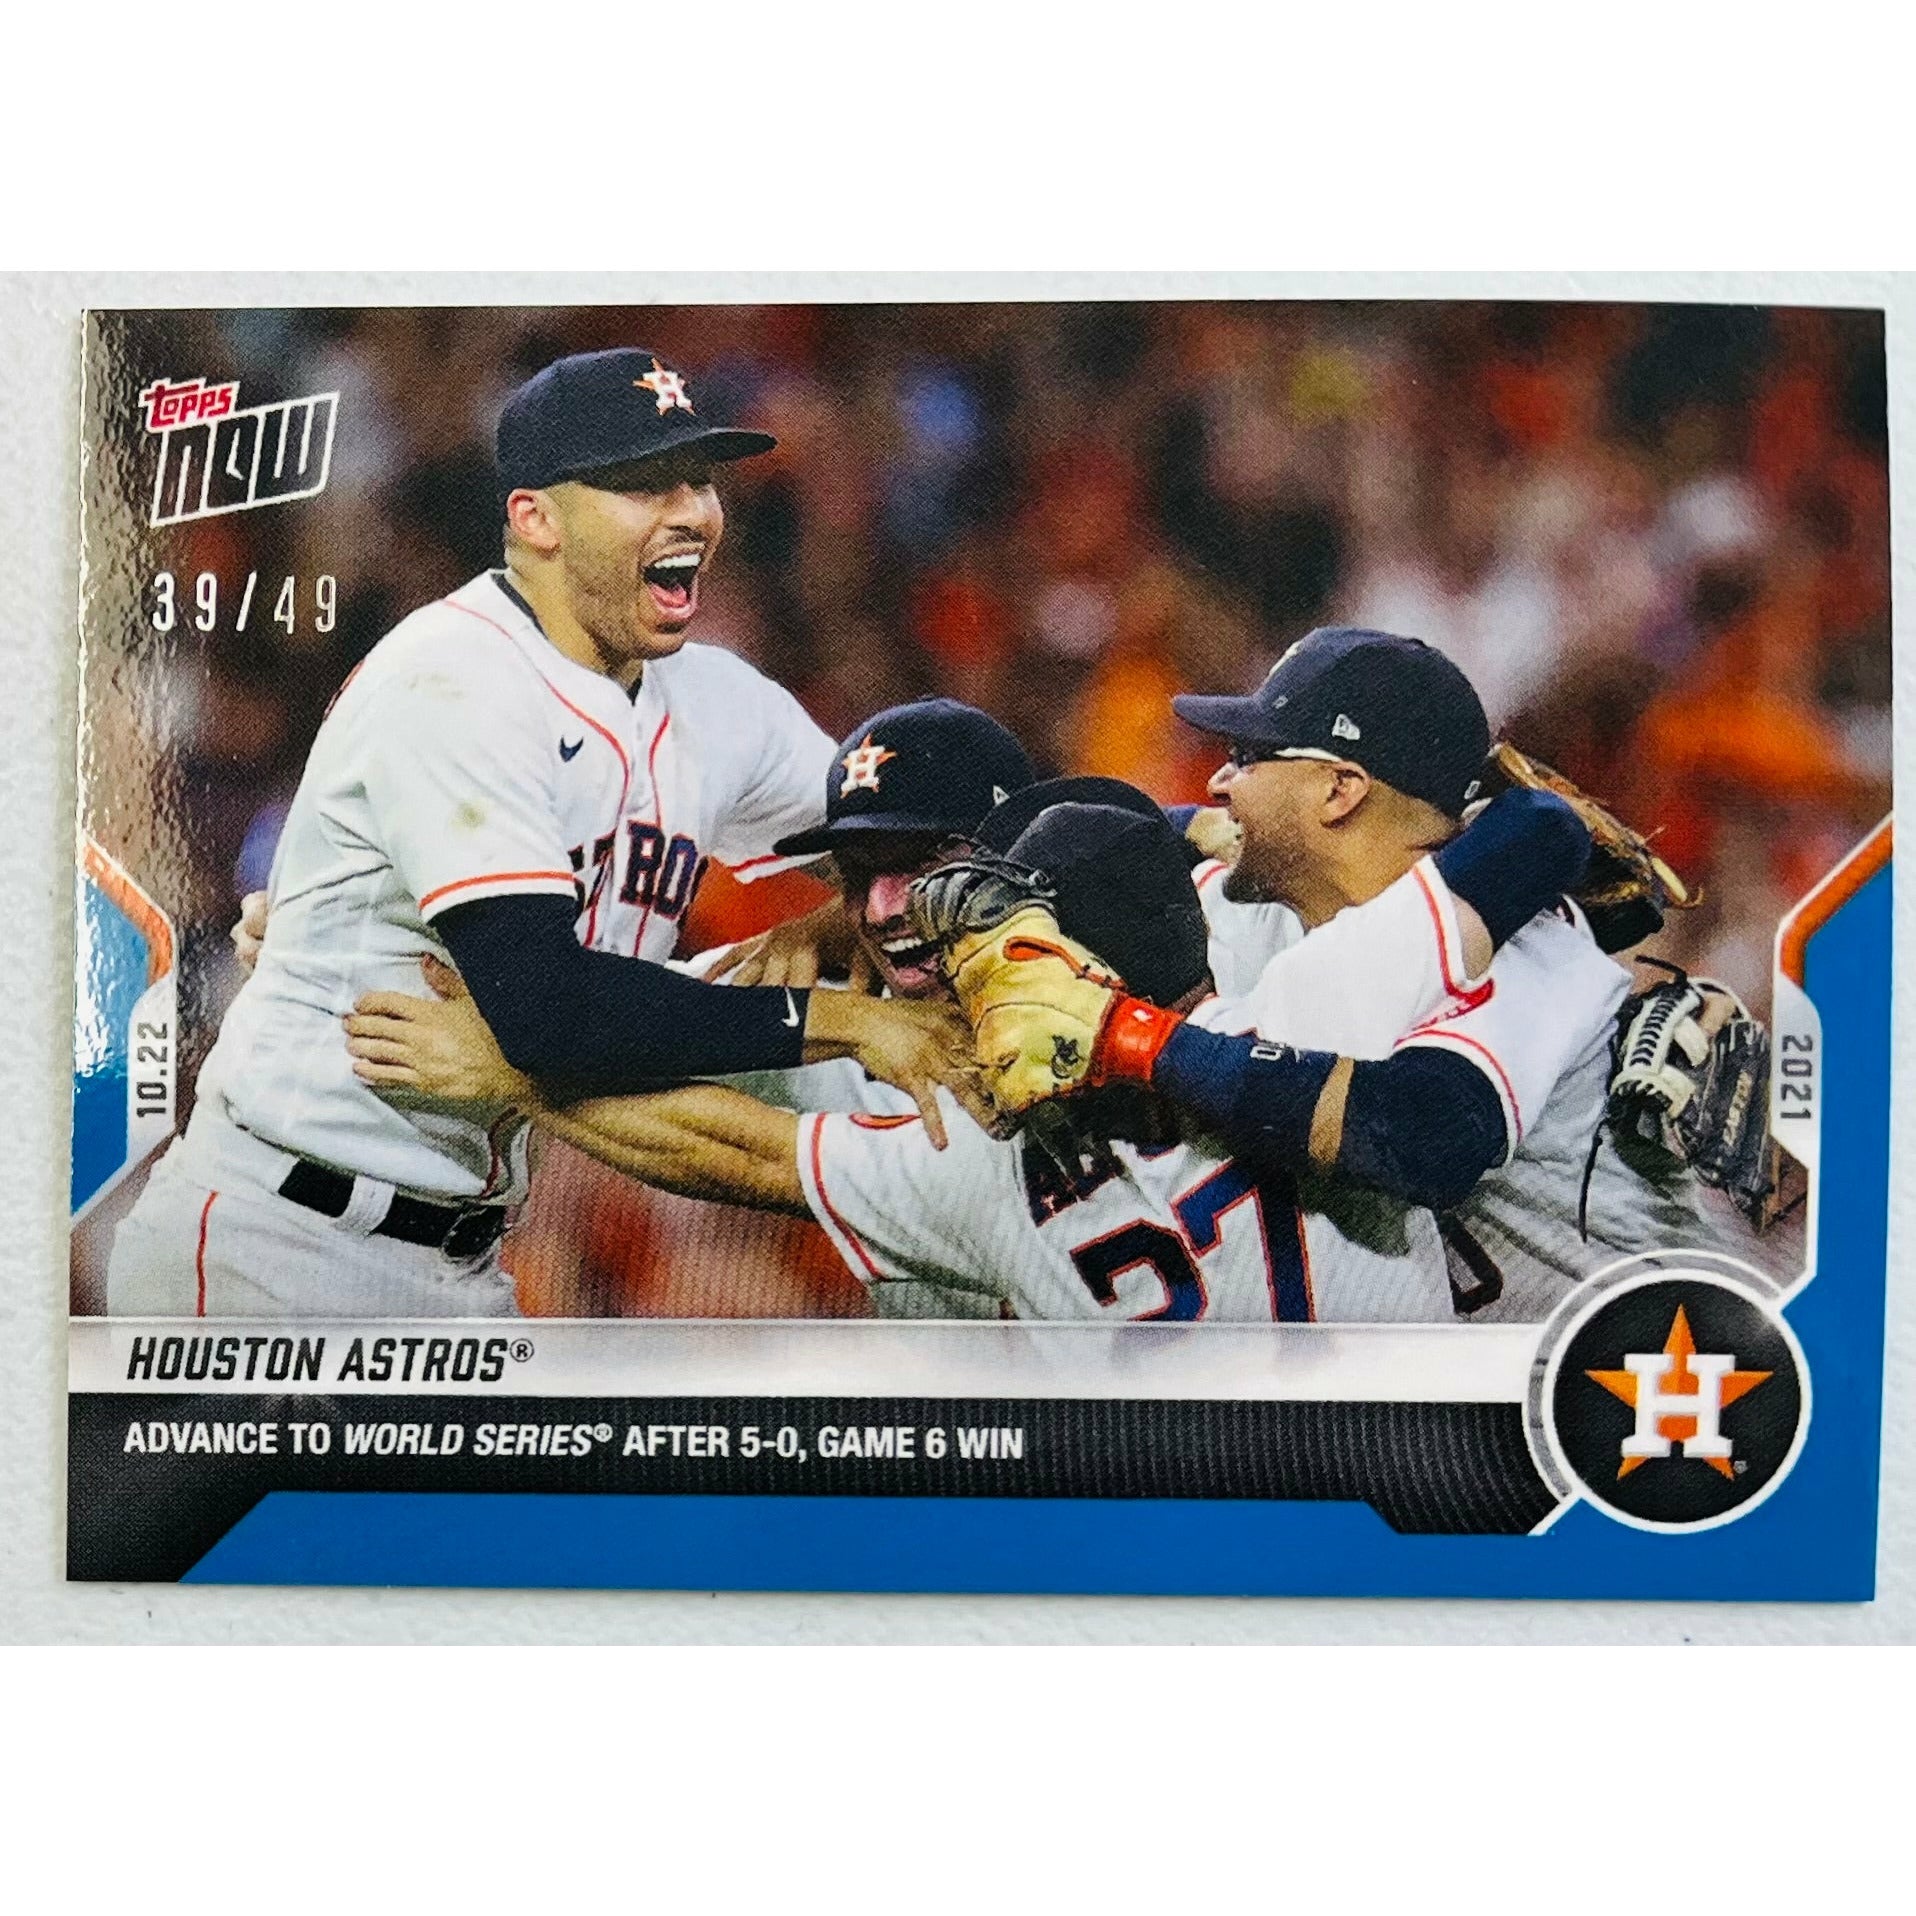 Houston Astros Advance to WS 2021 MLB TOPPS NOW Card 1006 Blue Parallel 39/49